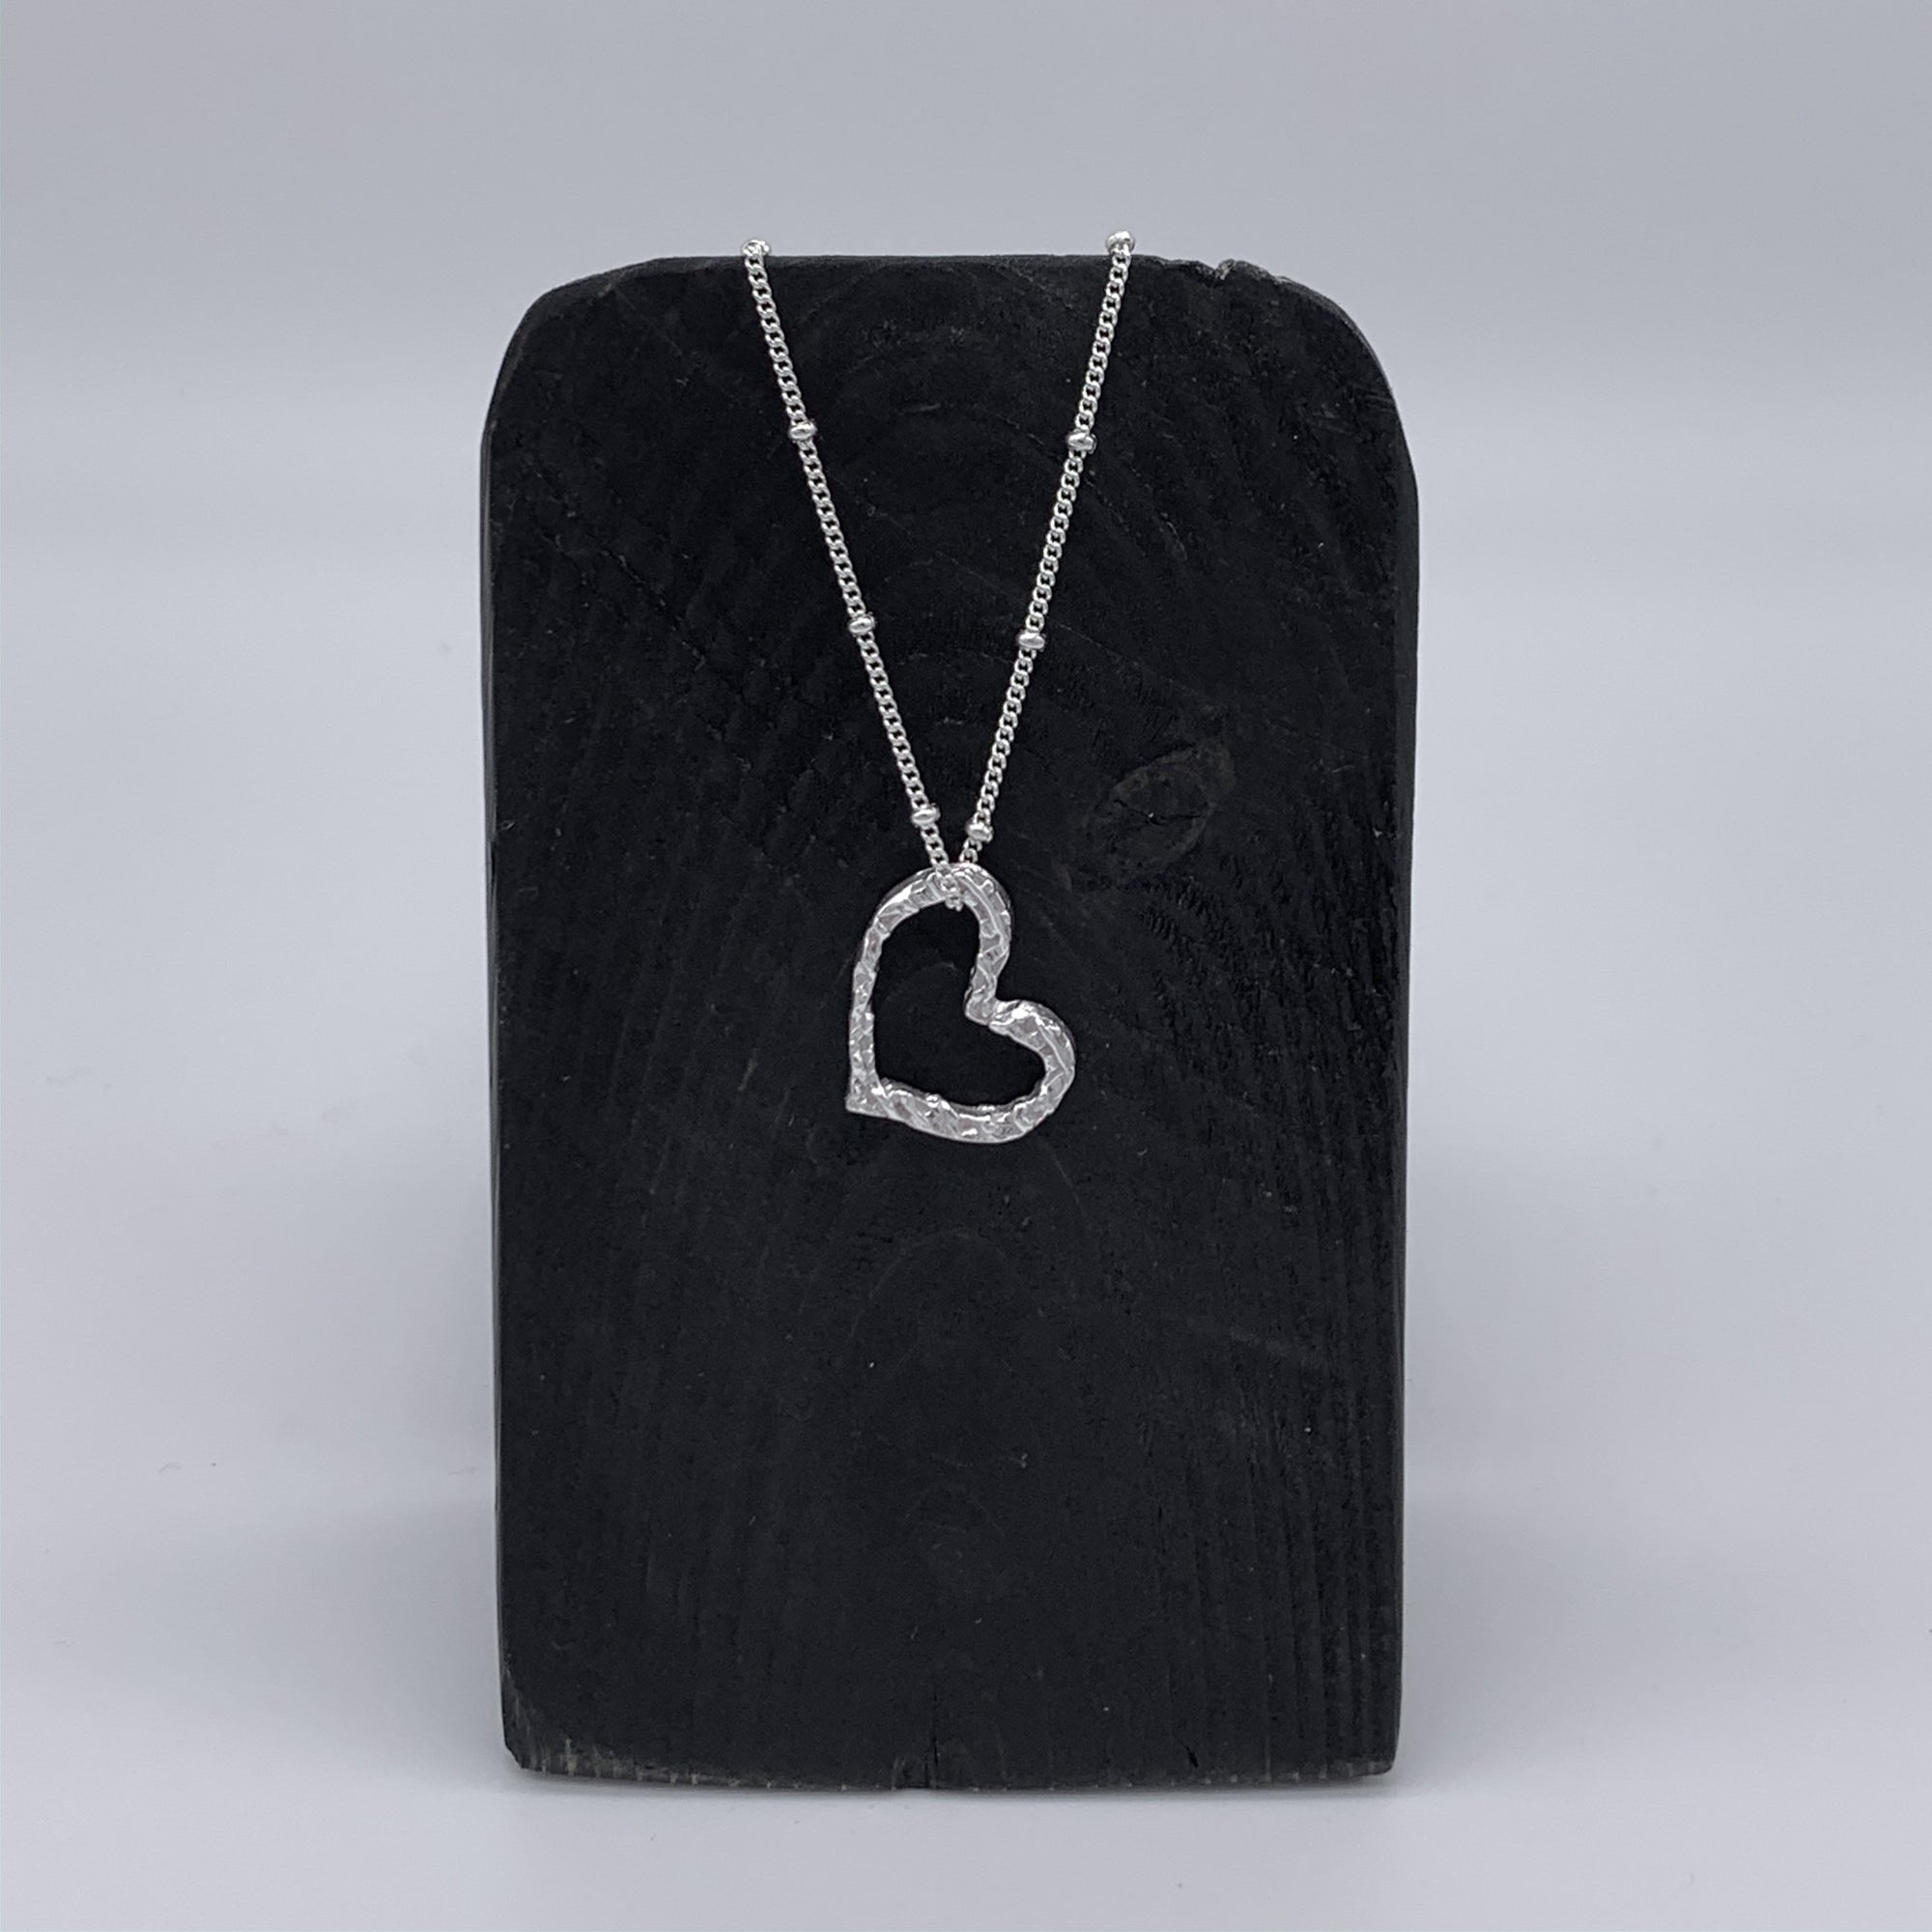 "Mini Whimsy" - Journey Heart Necklace